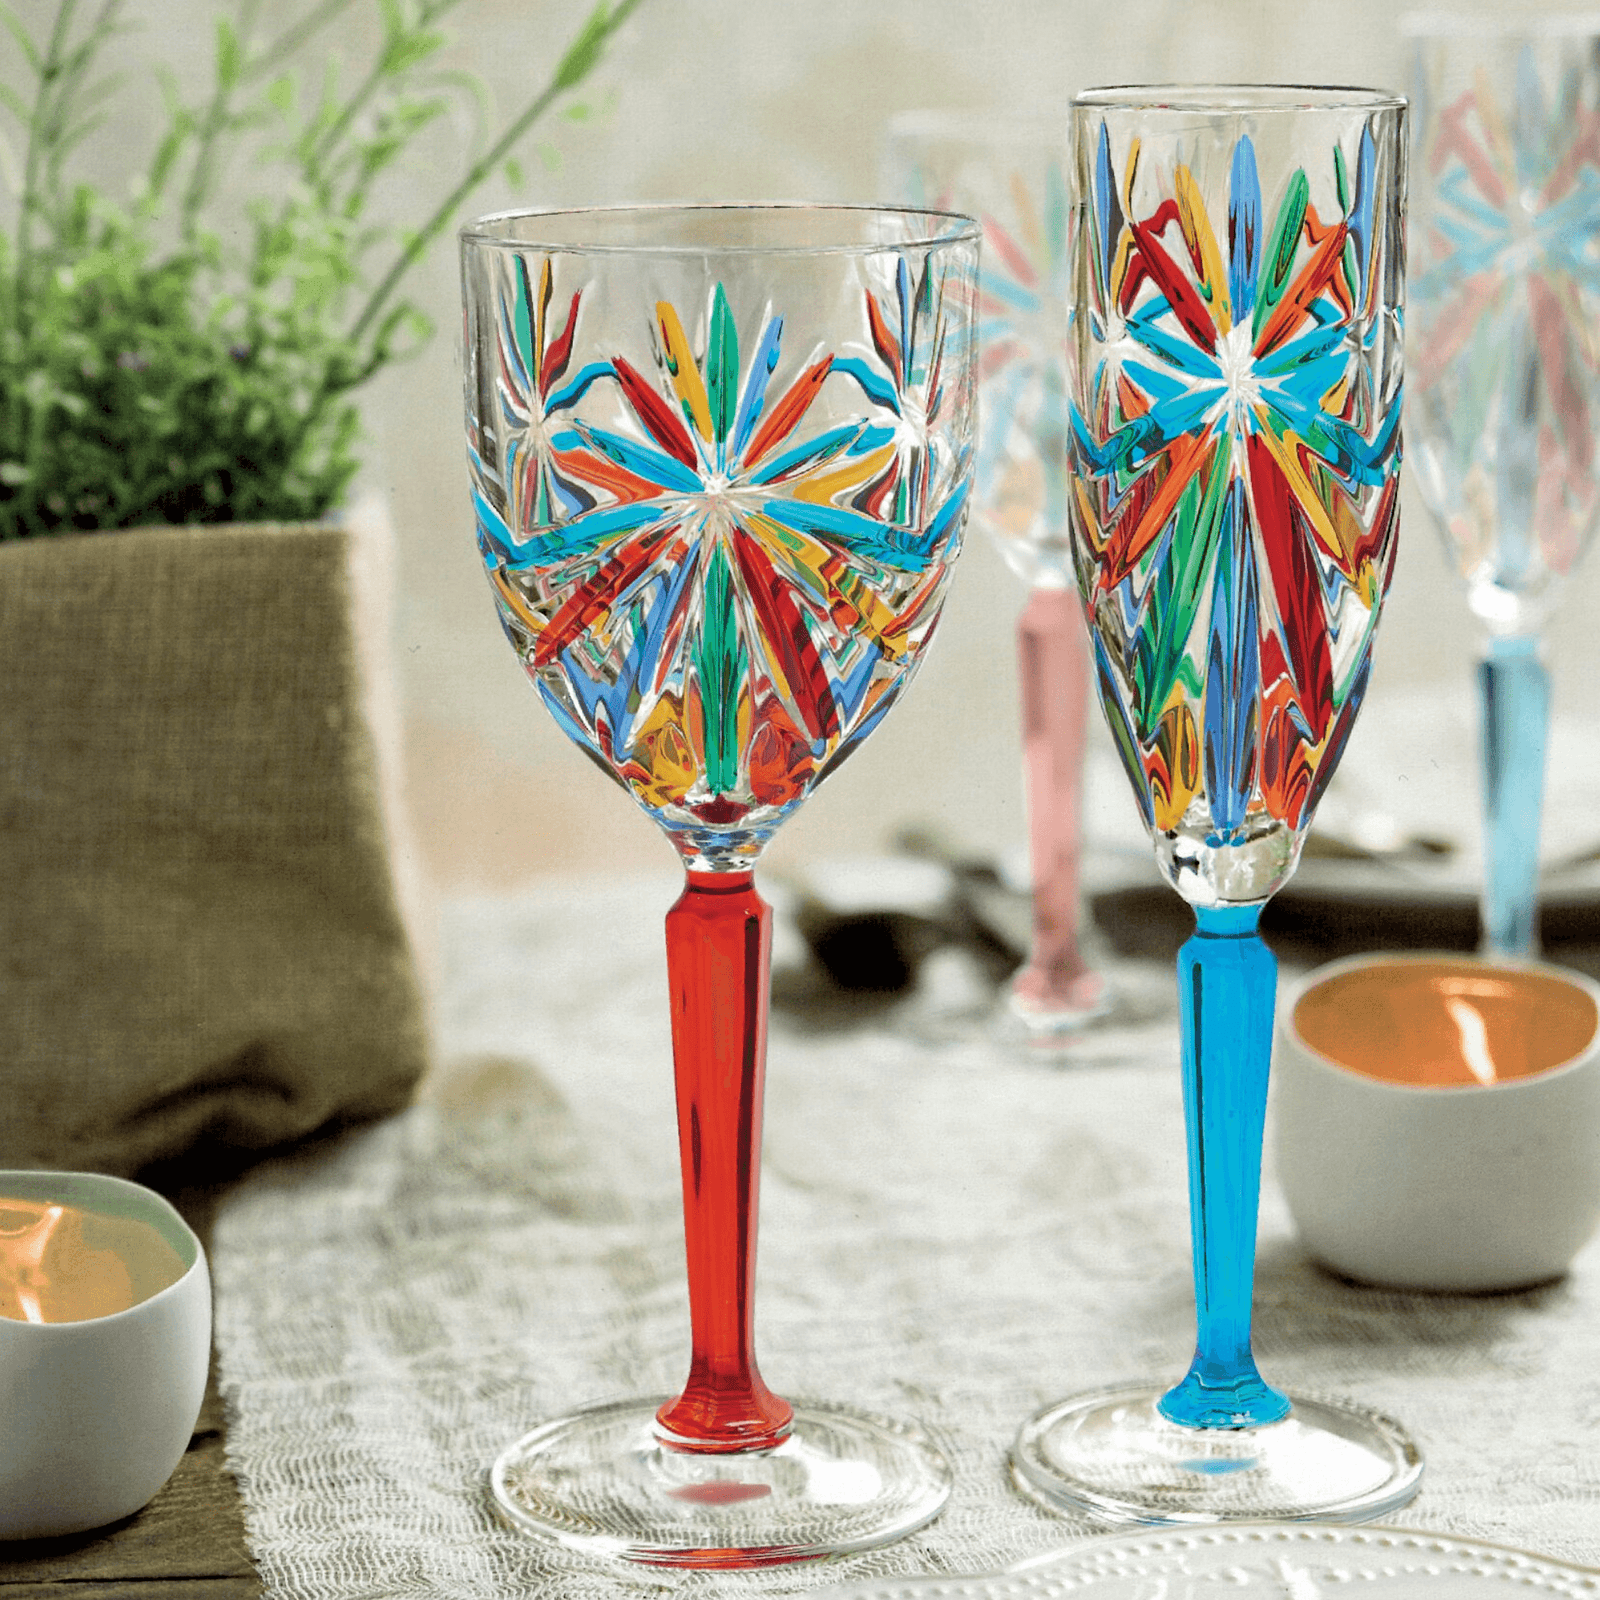 https://cdn.shopify.com/s/files/1/0597/3452/4084/products/starburst-wine-champagne-glasses_e3c508fc-cedc-48bb-ad26-6cefa29af4f3_1600x.png?v=1660341798